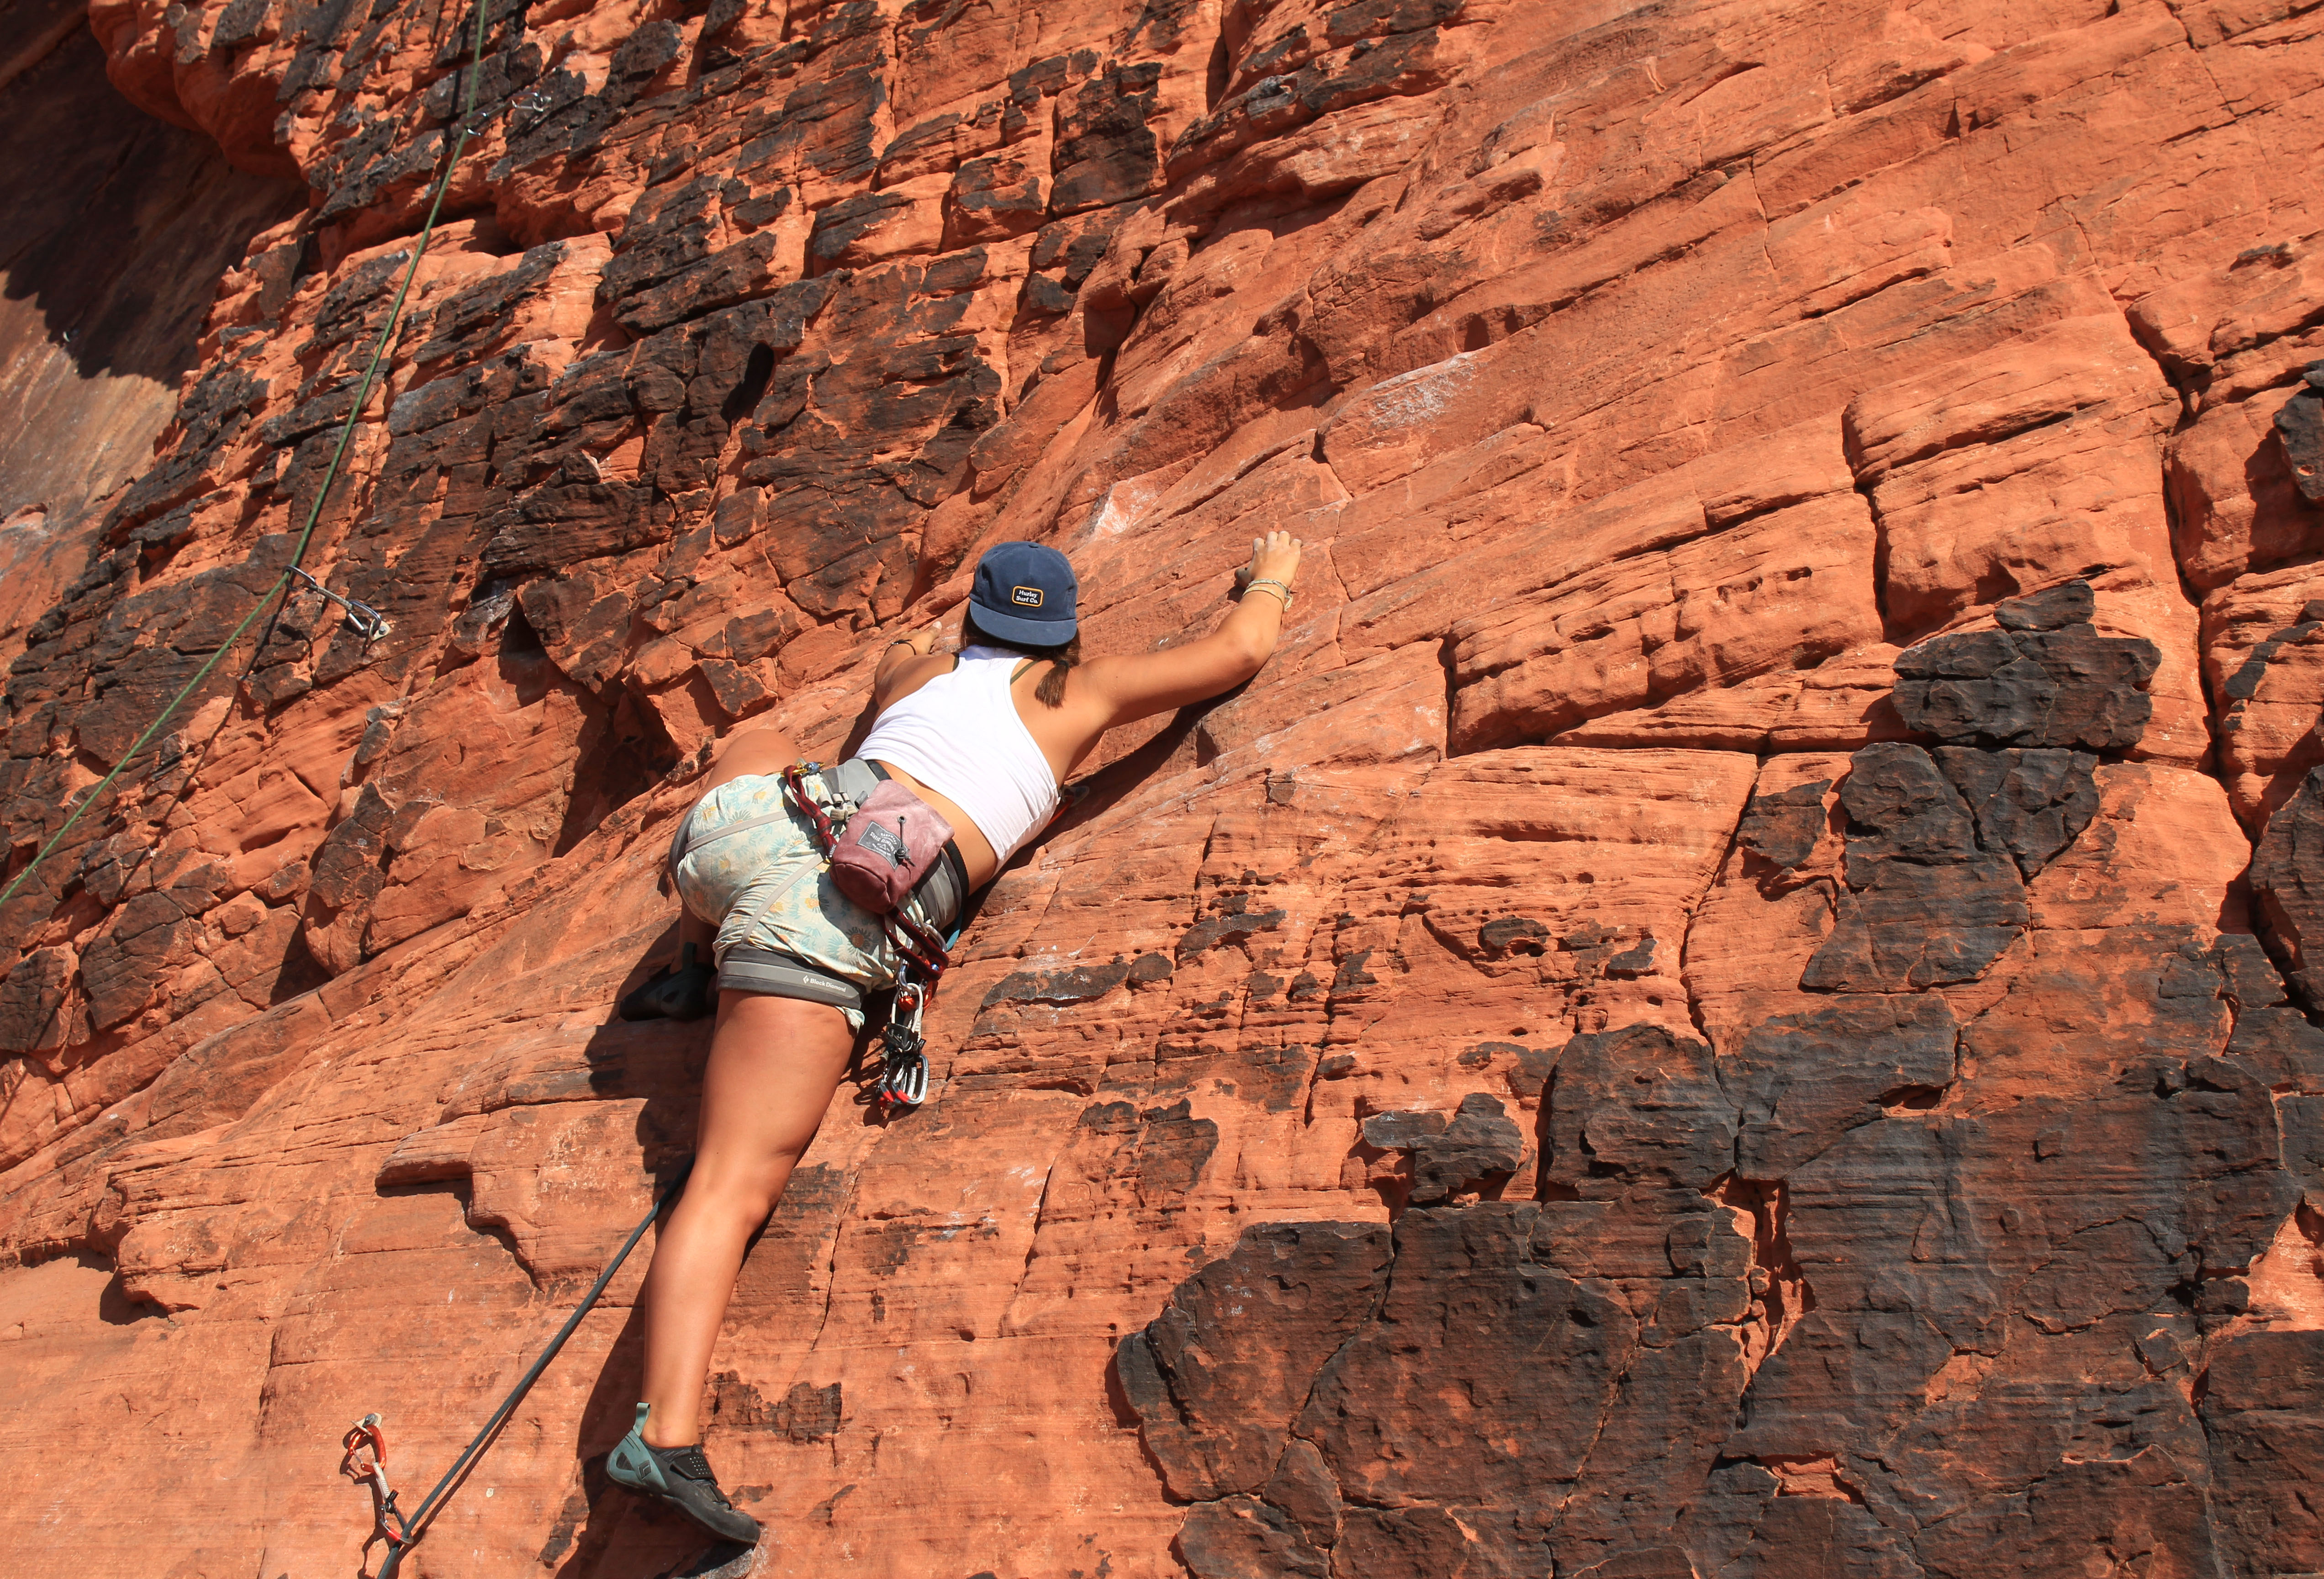 Eva Huber made time for rock climbing during her study abroad visit to Nepal.